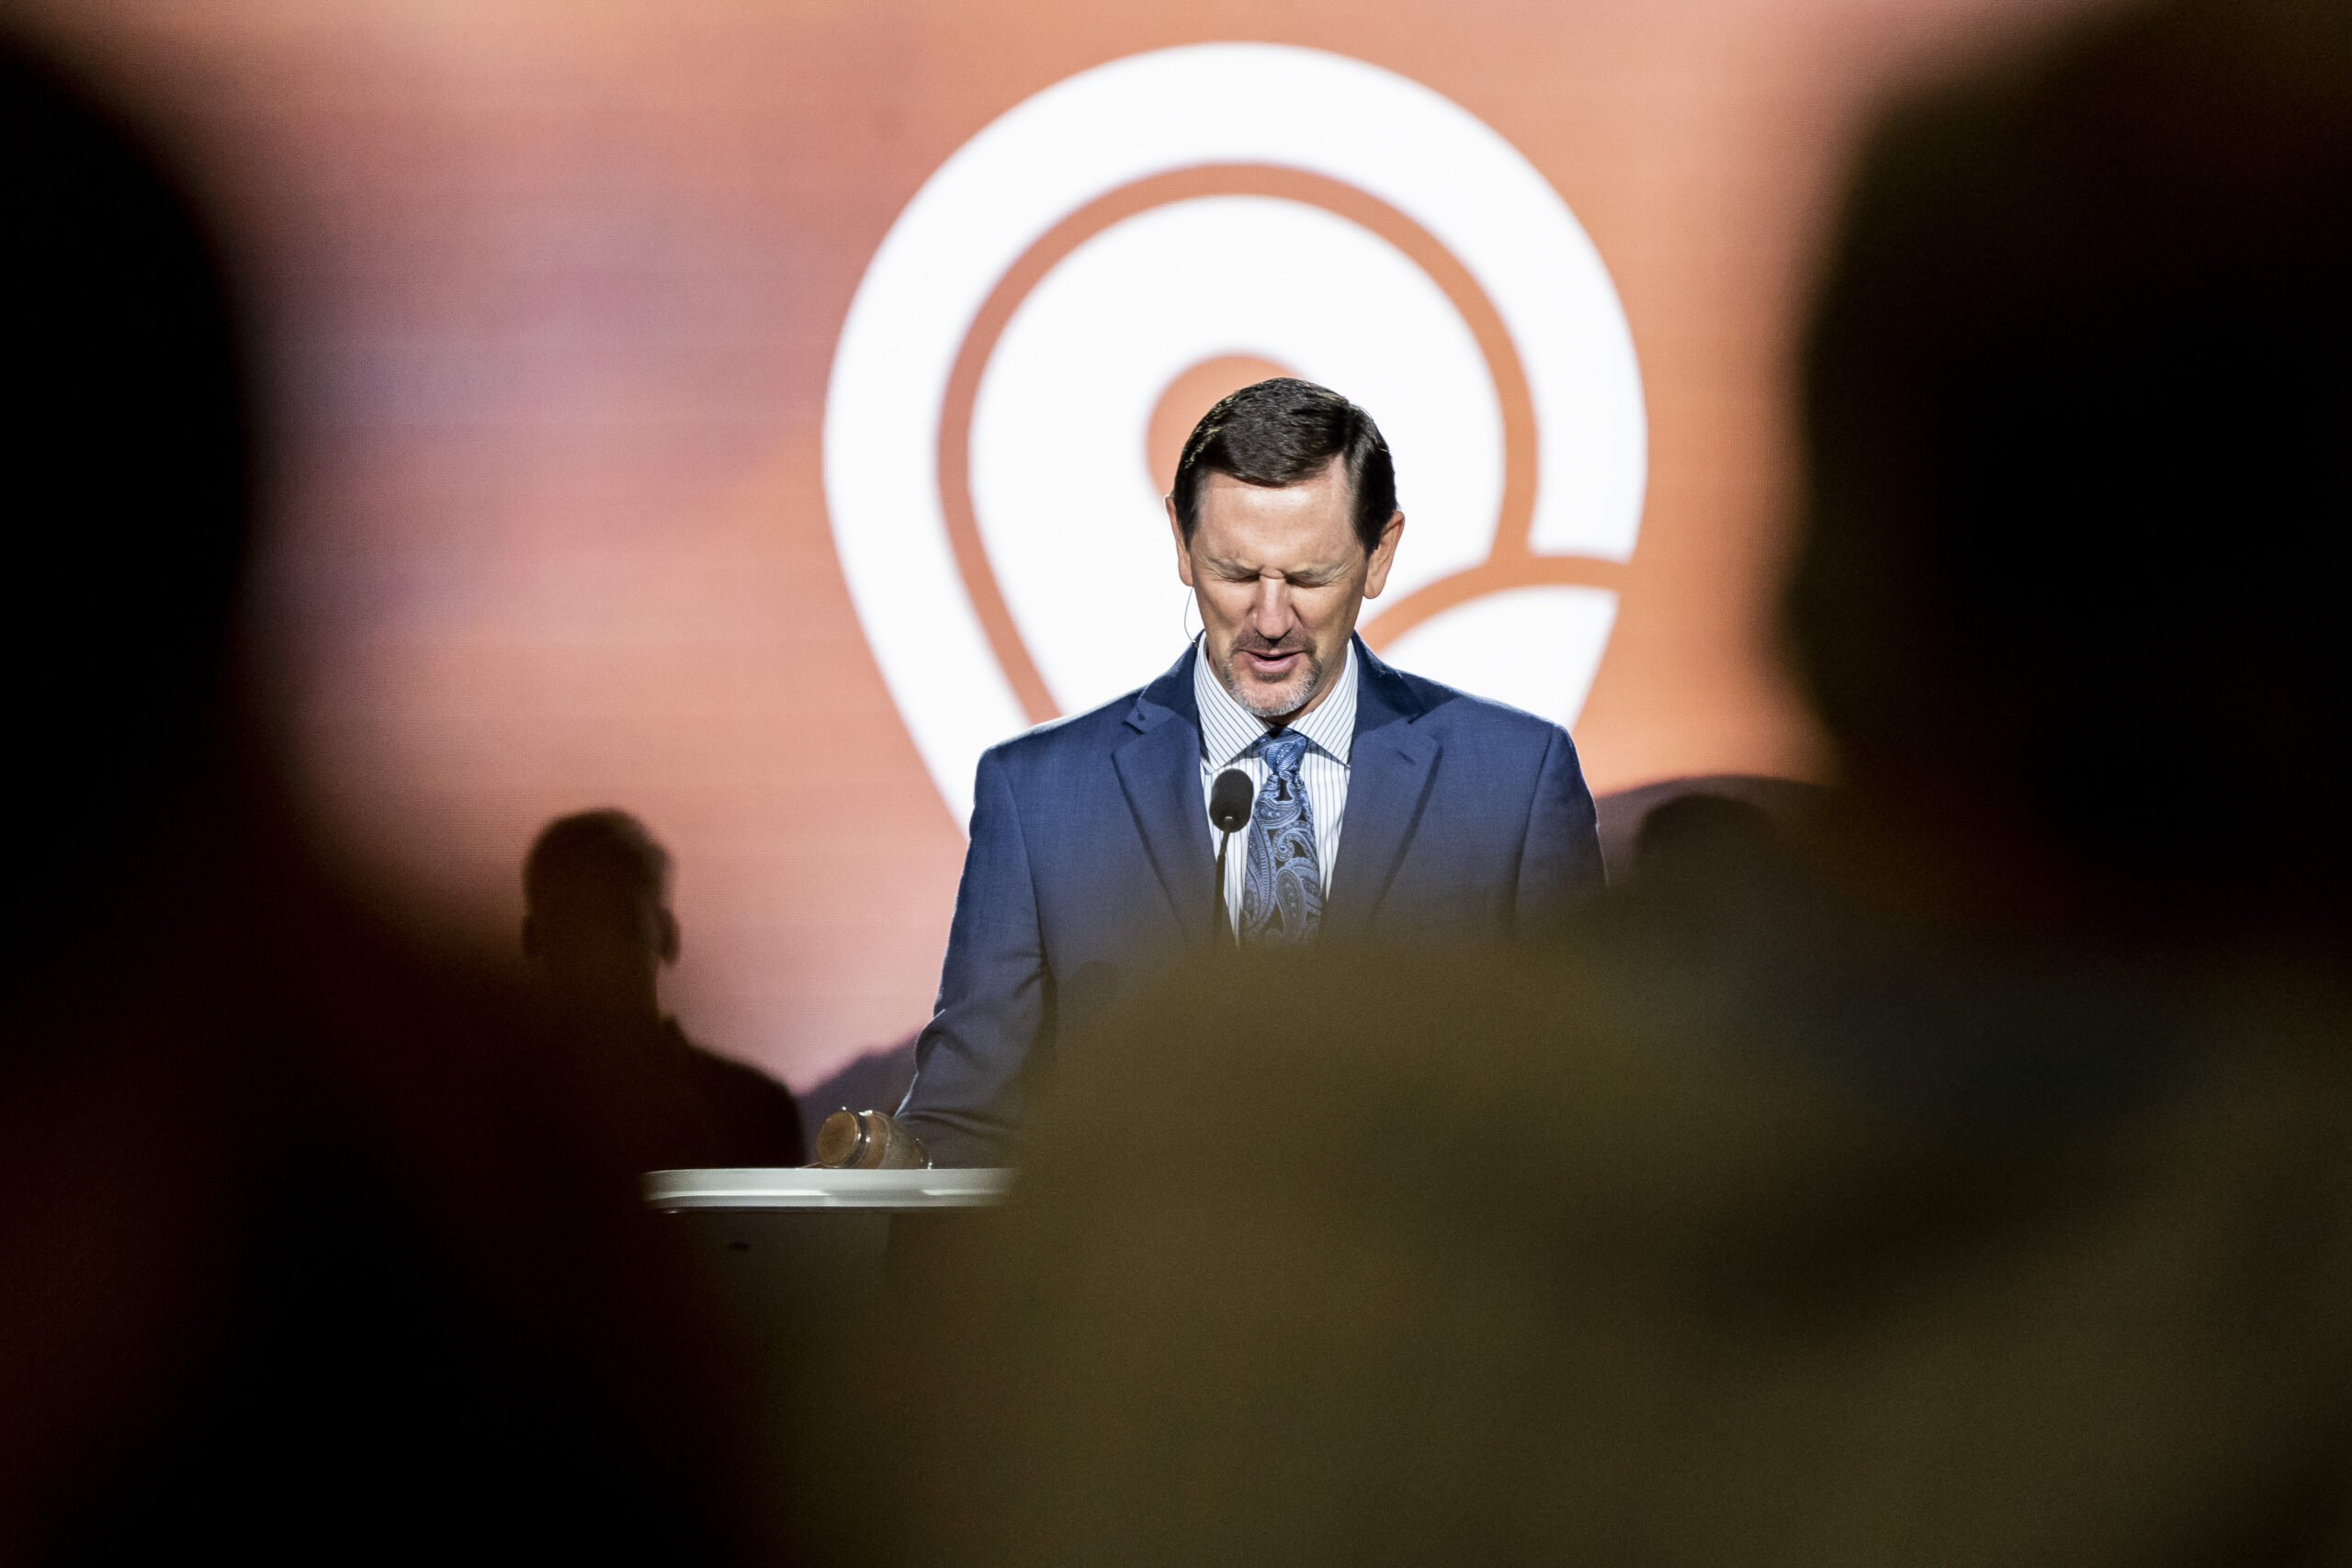 Paul Chitwood, president, International Mission Board, prays during the Southern Baptist Convention held at the Anaheim Convention Center in Anaheim, California, on Tuesday, June 14, 2022. Photo by Justin L. Stewart/Religion News Service